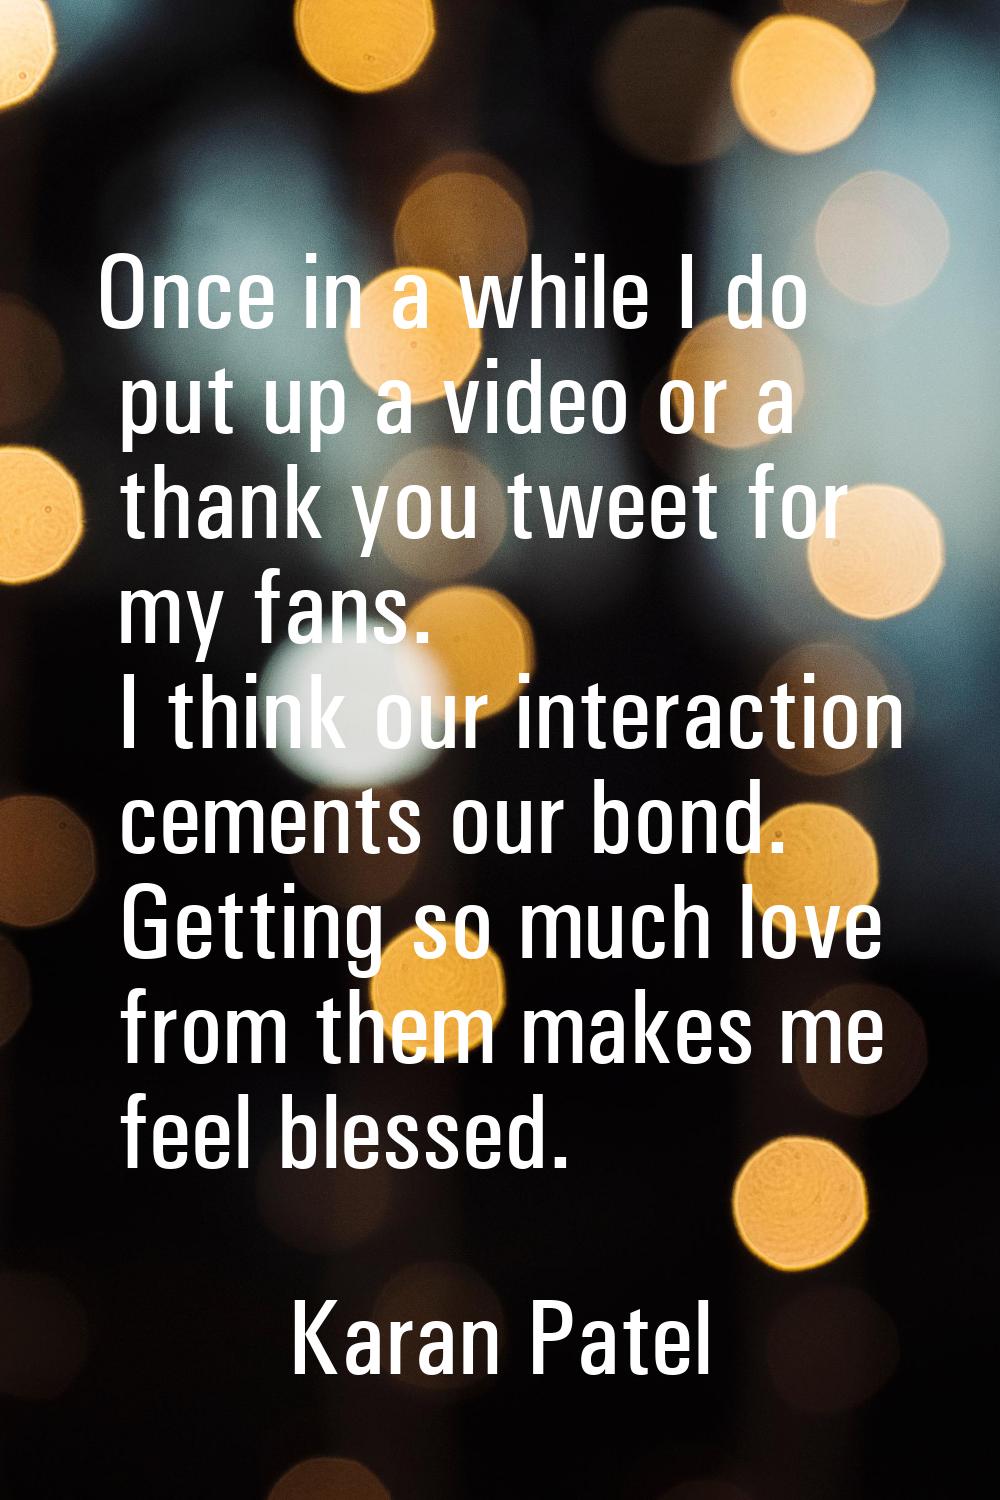 Once in a while I do put up a video or a thank you tweet for my fans. I think our interaction cemen